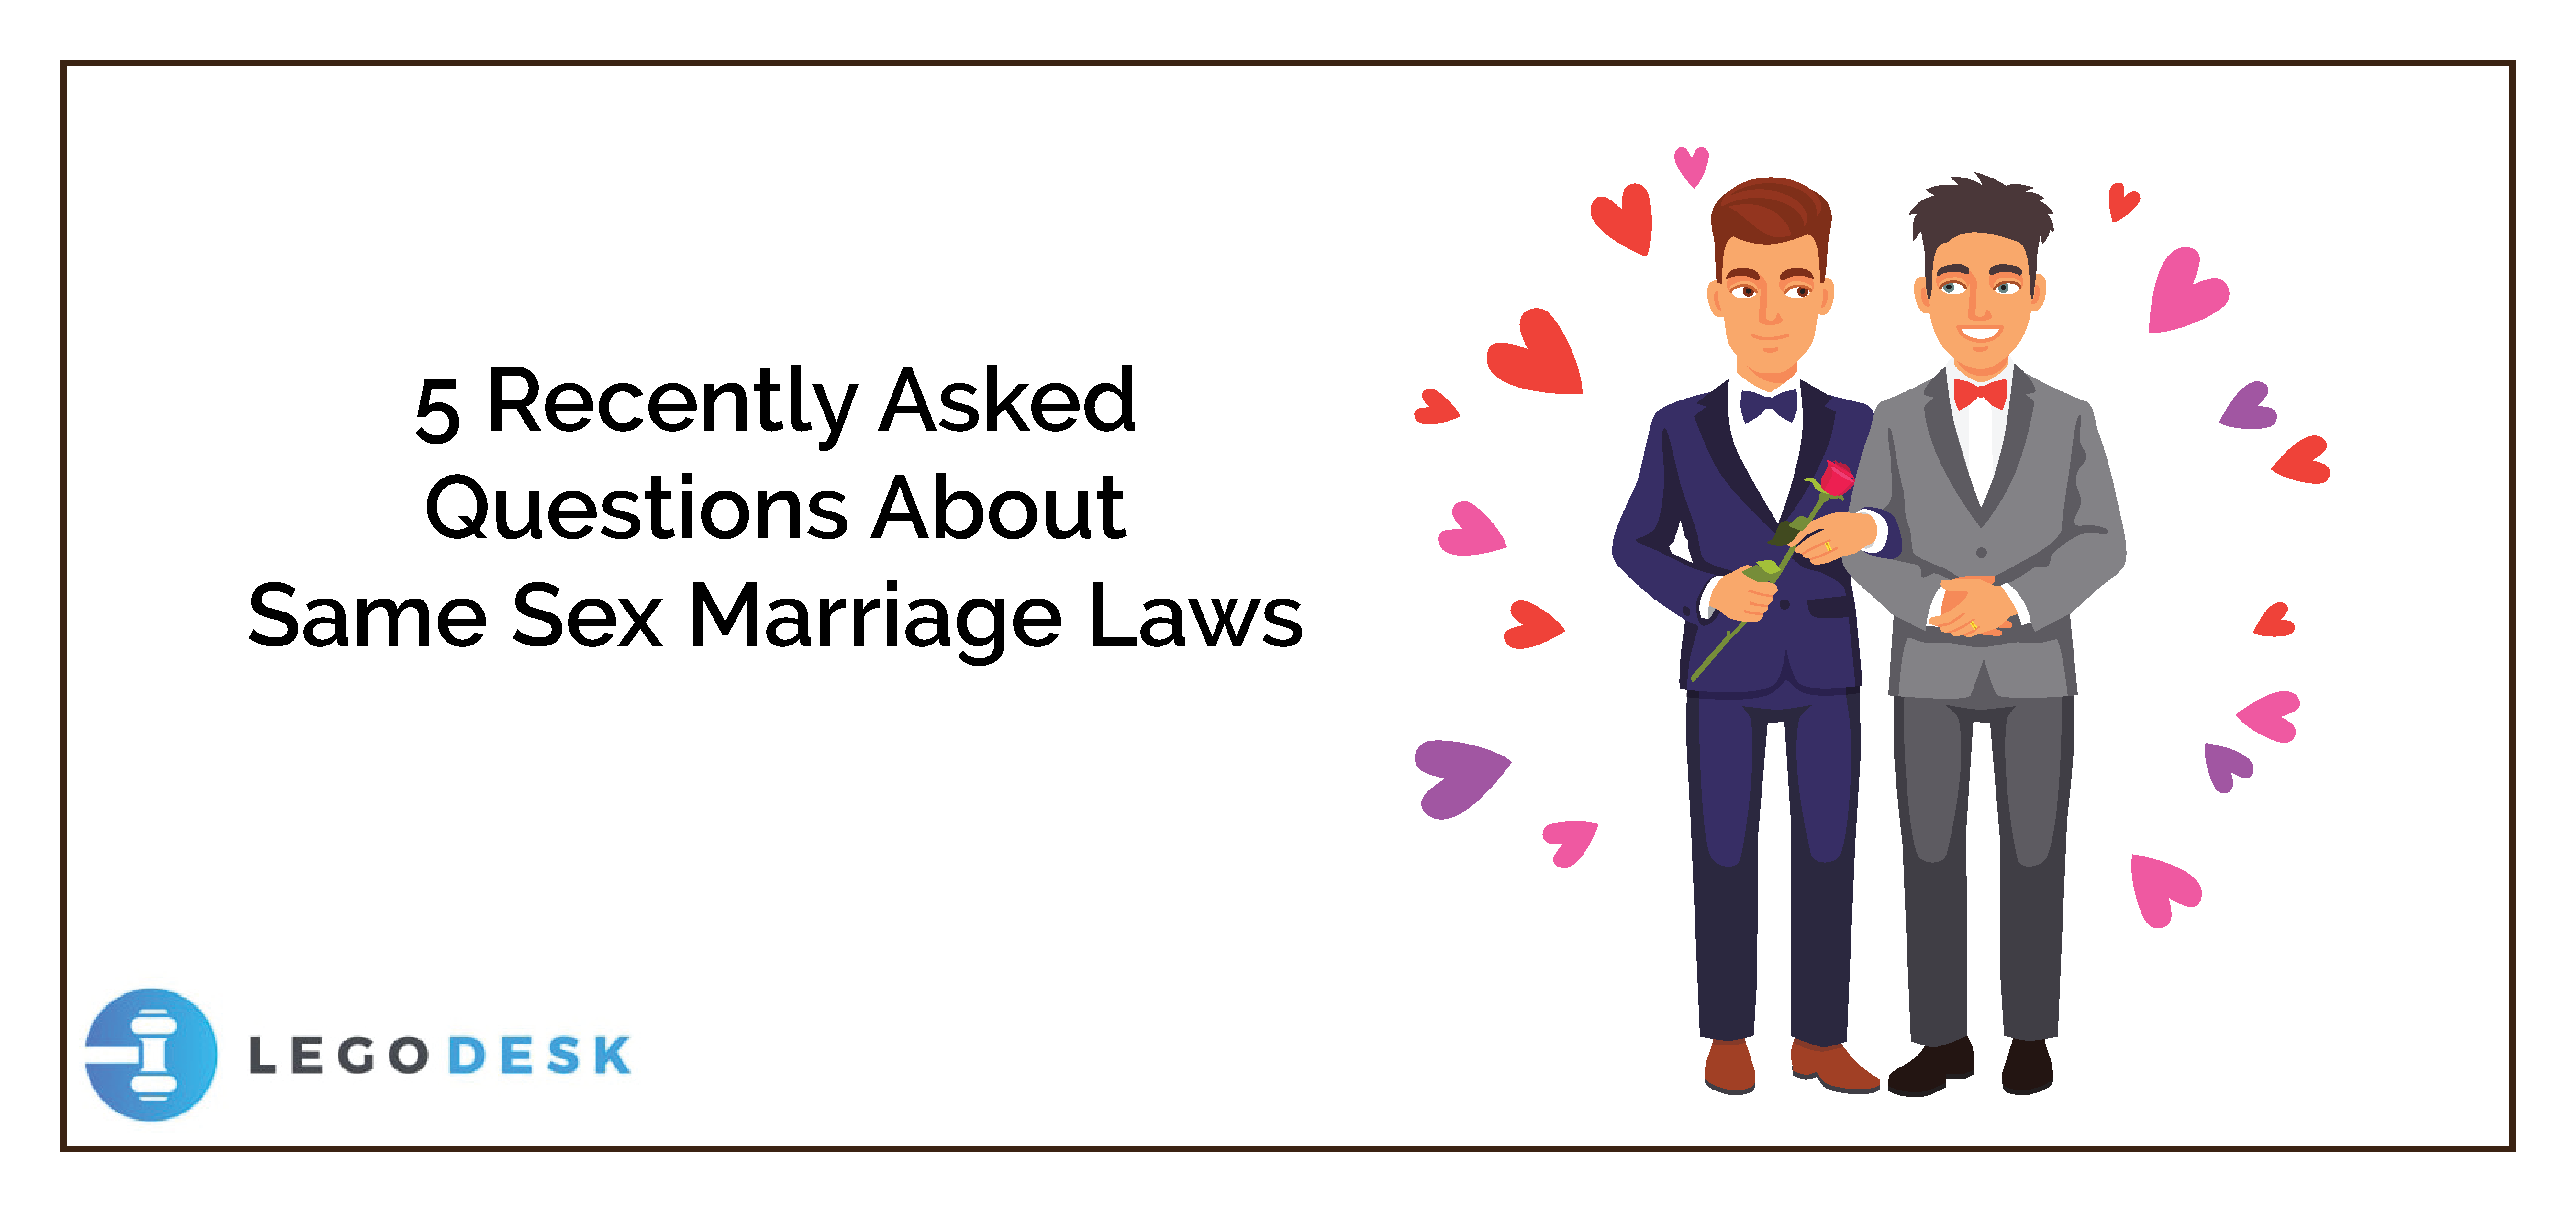 5 Recently Asked Questions About Same-Sex Marriage Laws